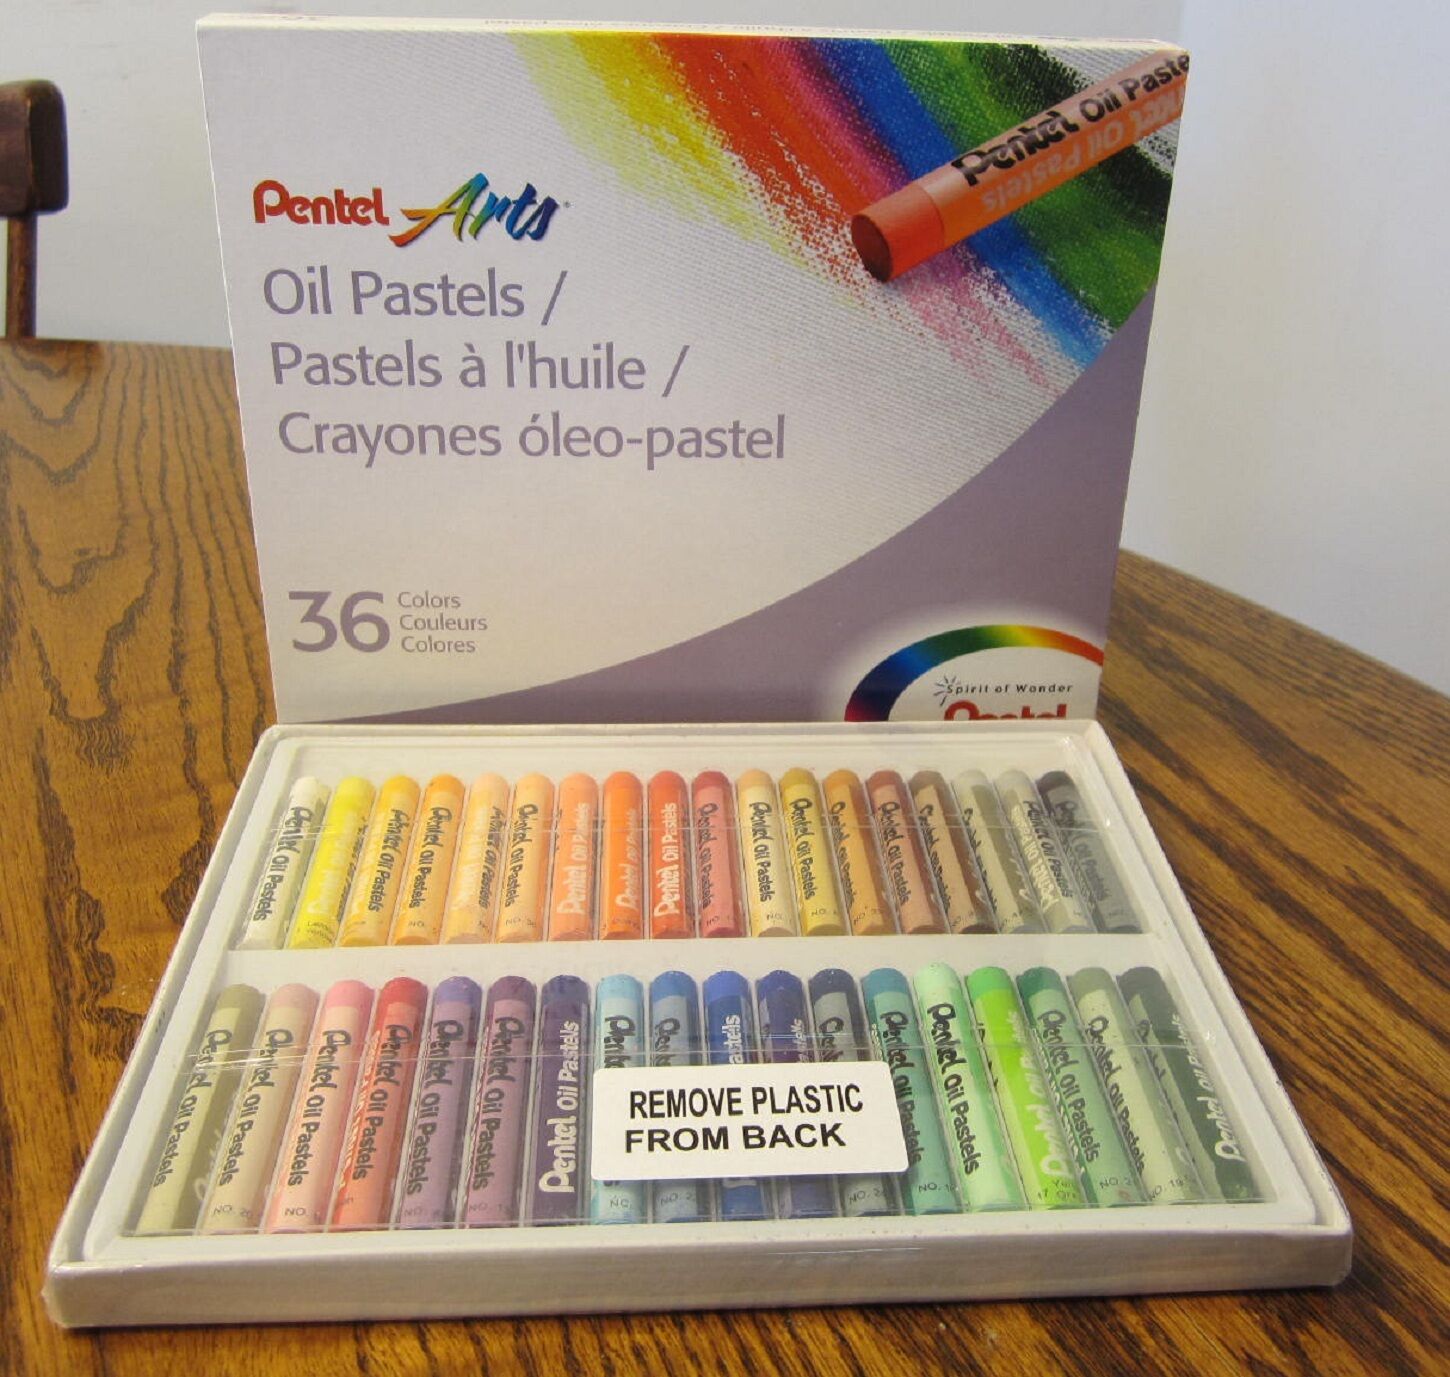 1 Pack Of Pentel Arts Oil Pastels Package For Paper Board Or Canvas 36 Colors